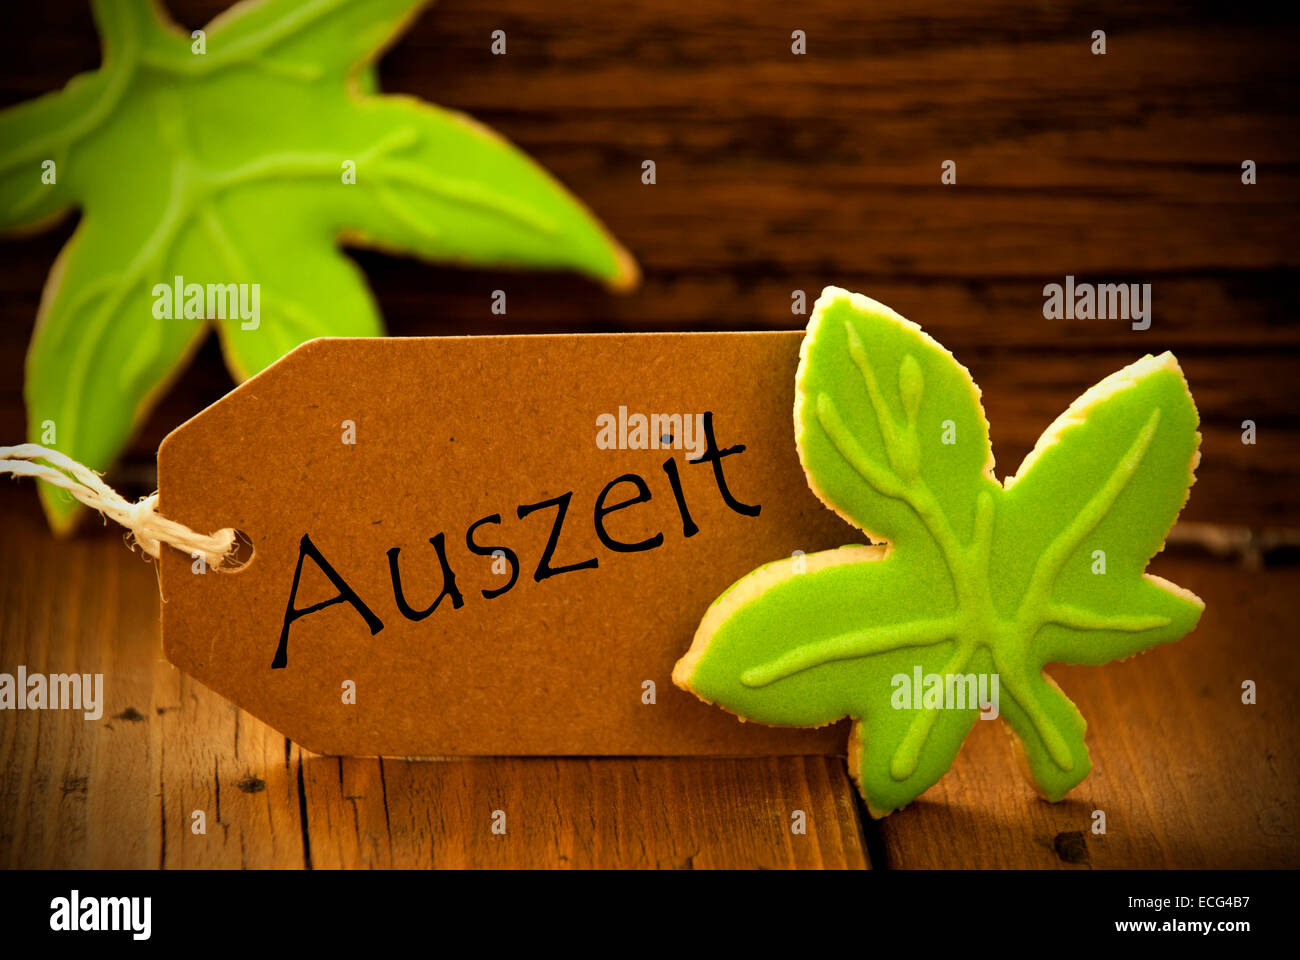 Brown Organic Label With German Text Auszeit On Wooden Background With Two Leaf Cookies And Frame Stock Photo